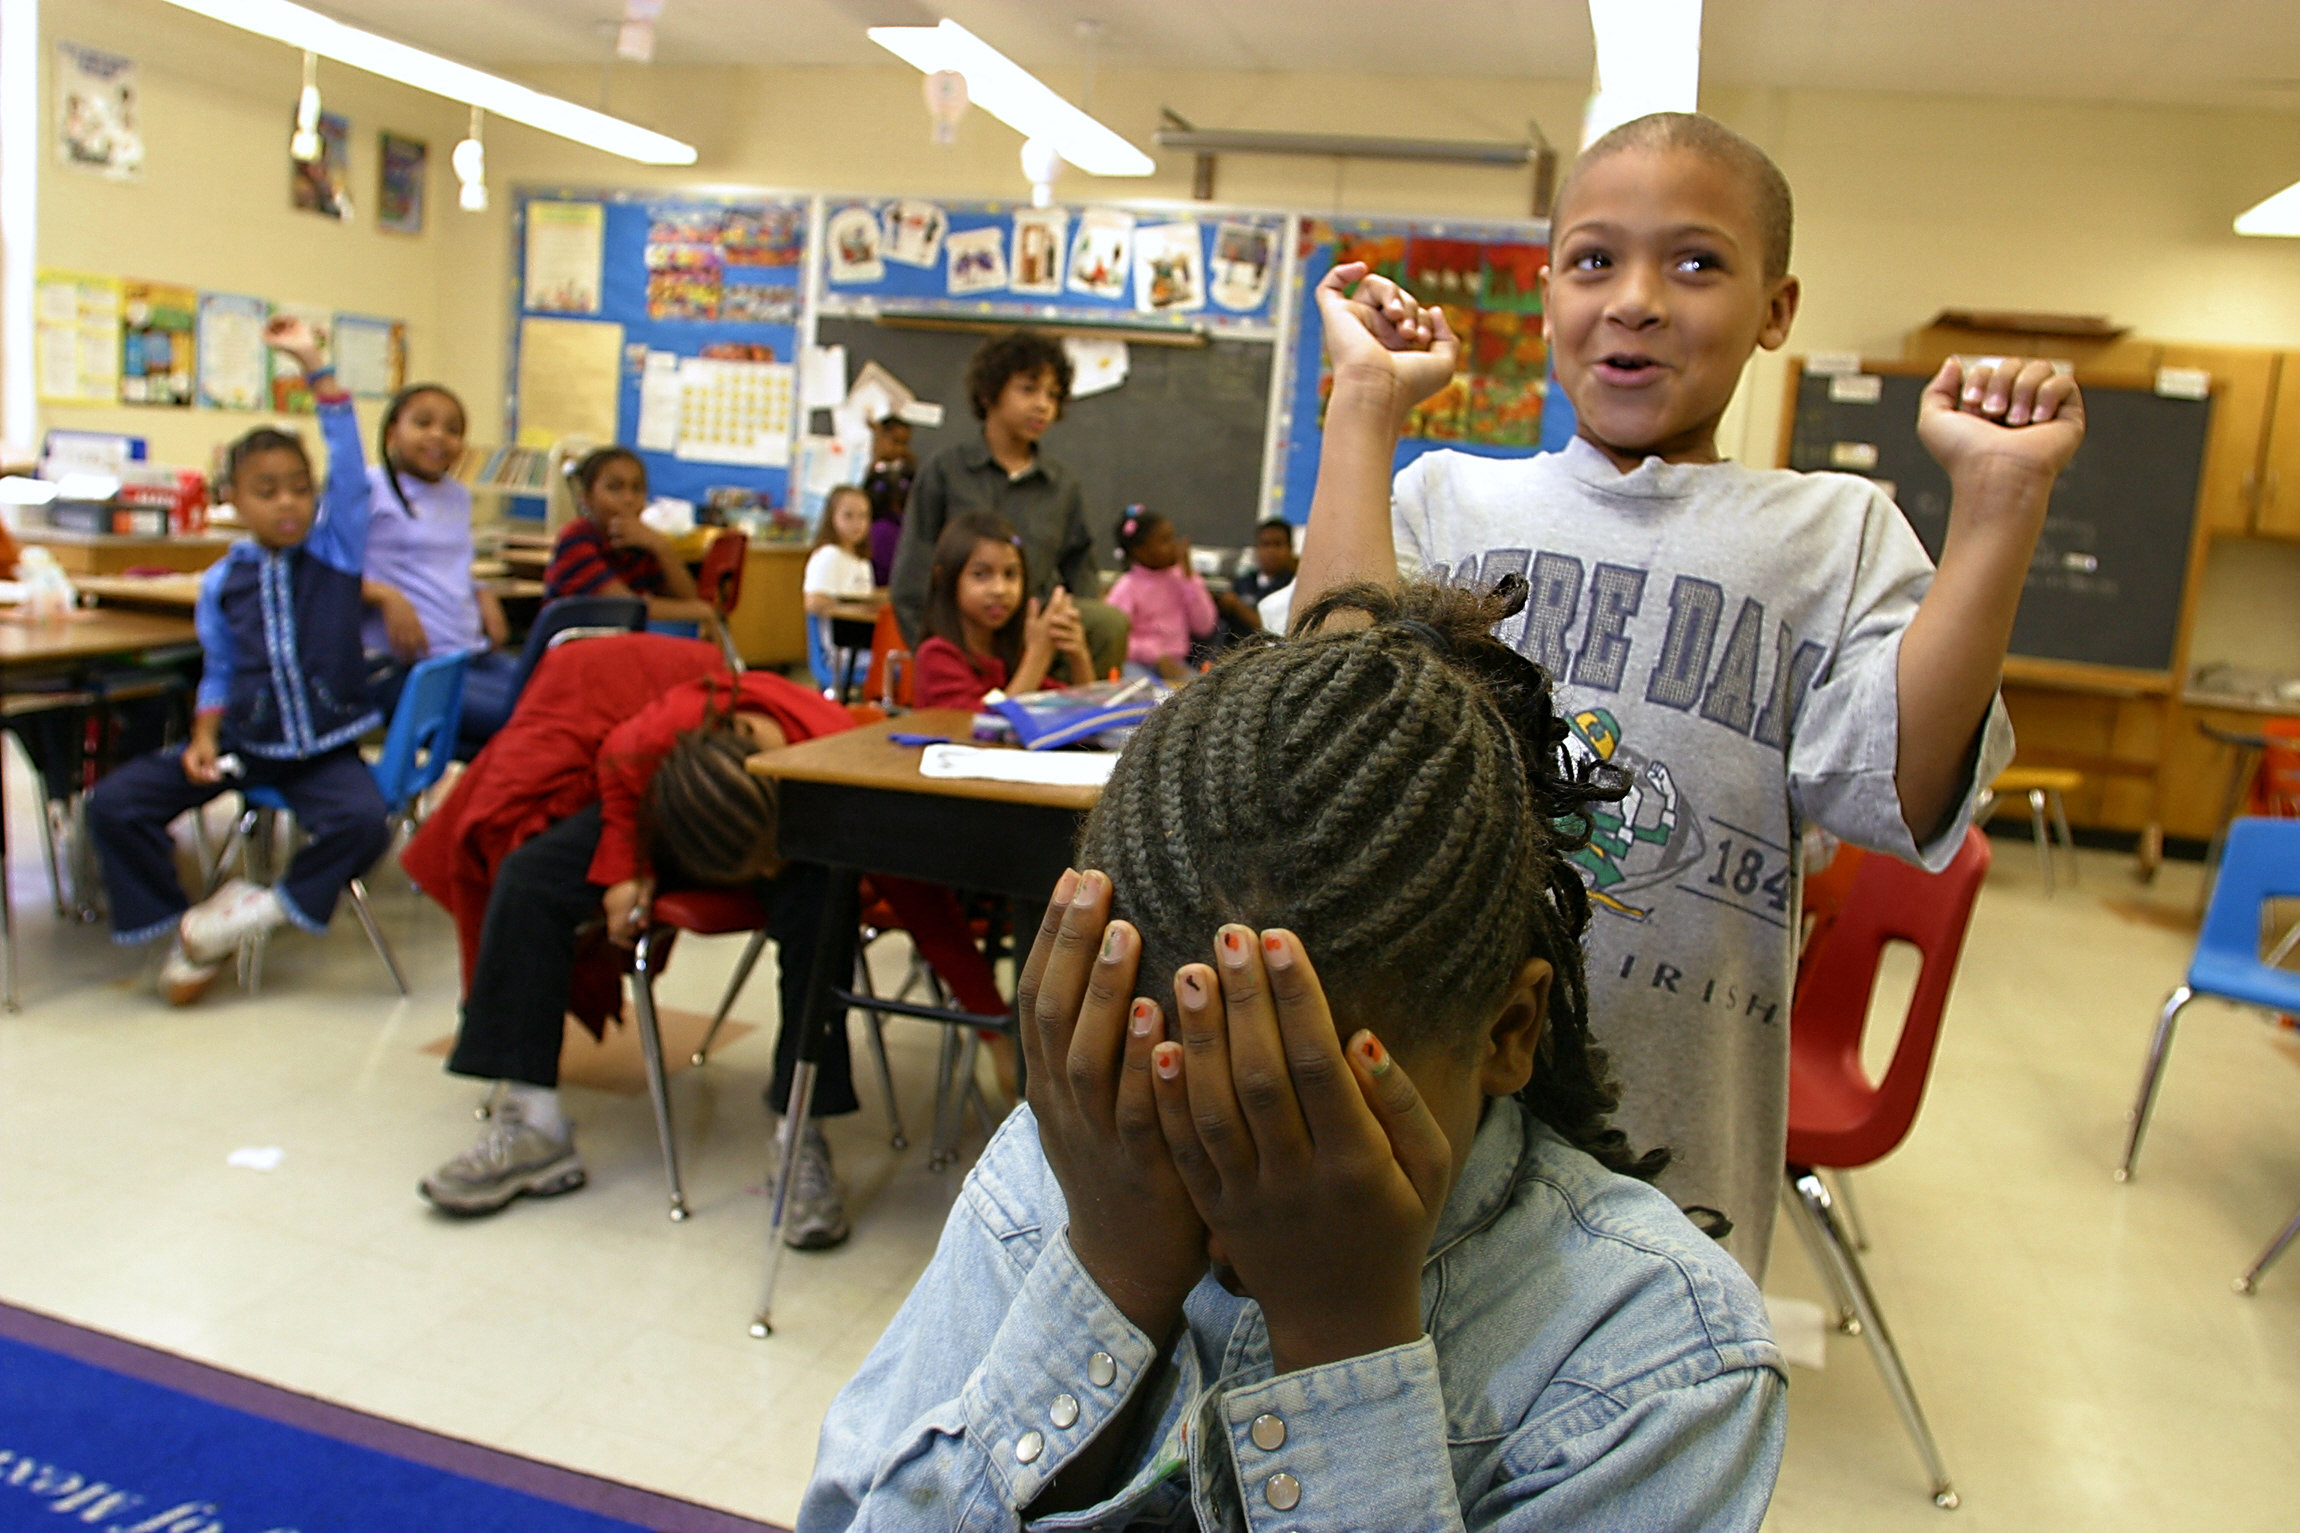 Students in Ms. Beckerman's third grade class play a guessing game in their classroom at Heather Hills Elementary School in Bowie, Maryland 17 October 2002 at recess in place of their normal outdoor activities. Exactly two weeks after the Washington-area snipe gunned down five people in one day, area schools, teachers and students are forced to stay indoors under the constriction of a lockdown, with school doors locked, windows closed and all outdoor activities cancelled. Heather Hills is only 1.5 miles from Benjamin Tasker Middle School where a 13-year old boy was critical injured in a sniper shooting 07 October. AFP PHOTO / Robyn BECK (Photo by ROBYN BECK / AFP) (Photo by ROBYN BECK/AFP via Getty Images)